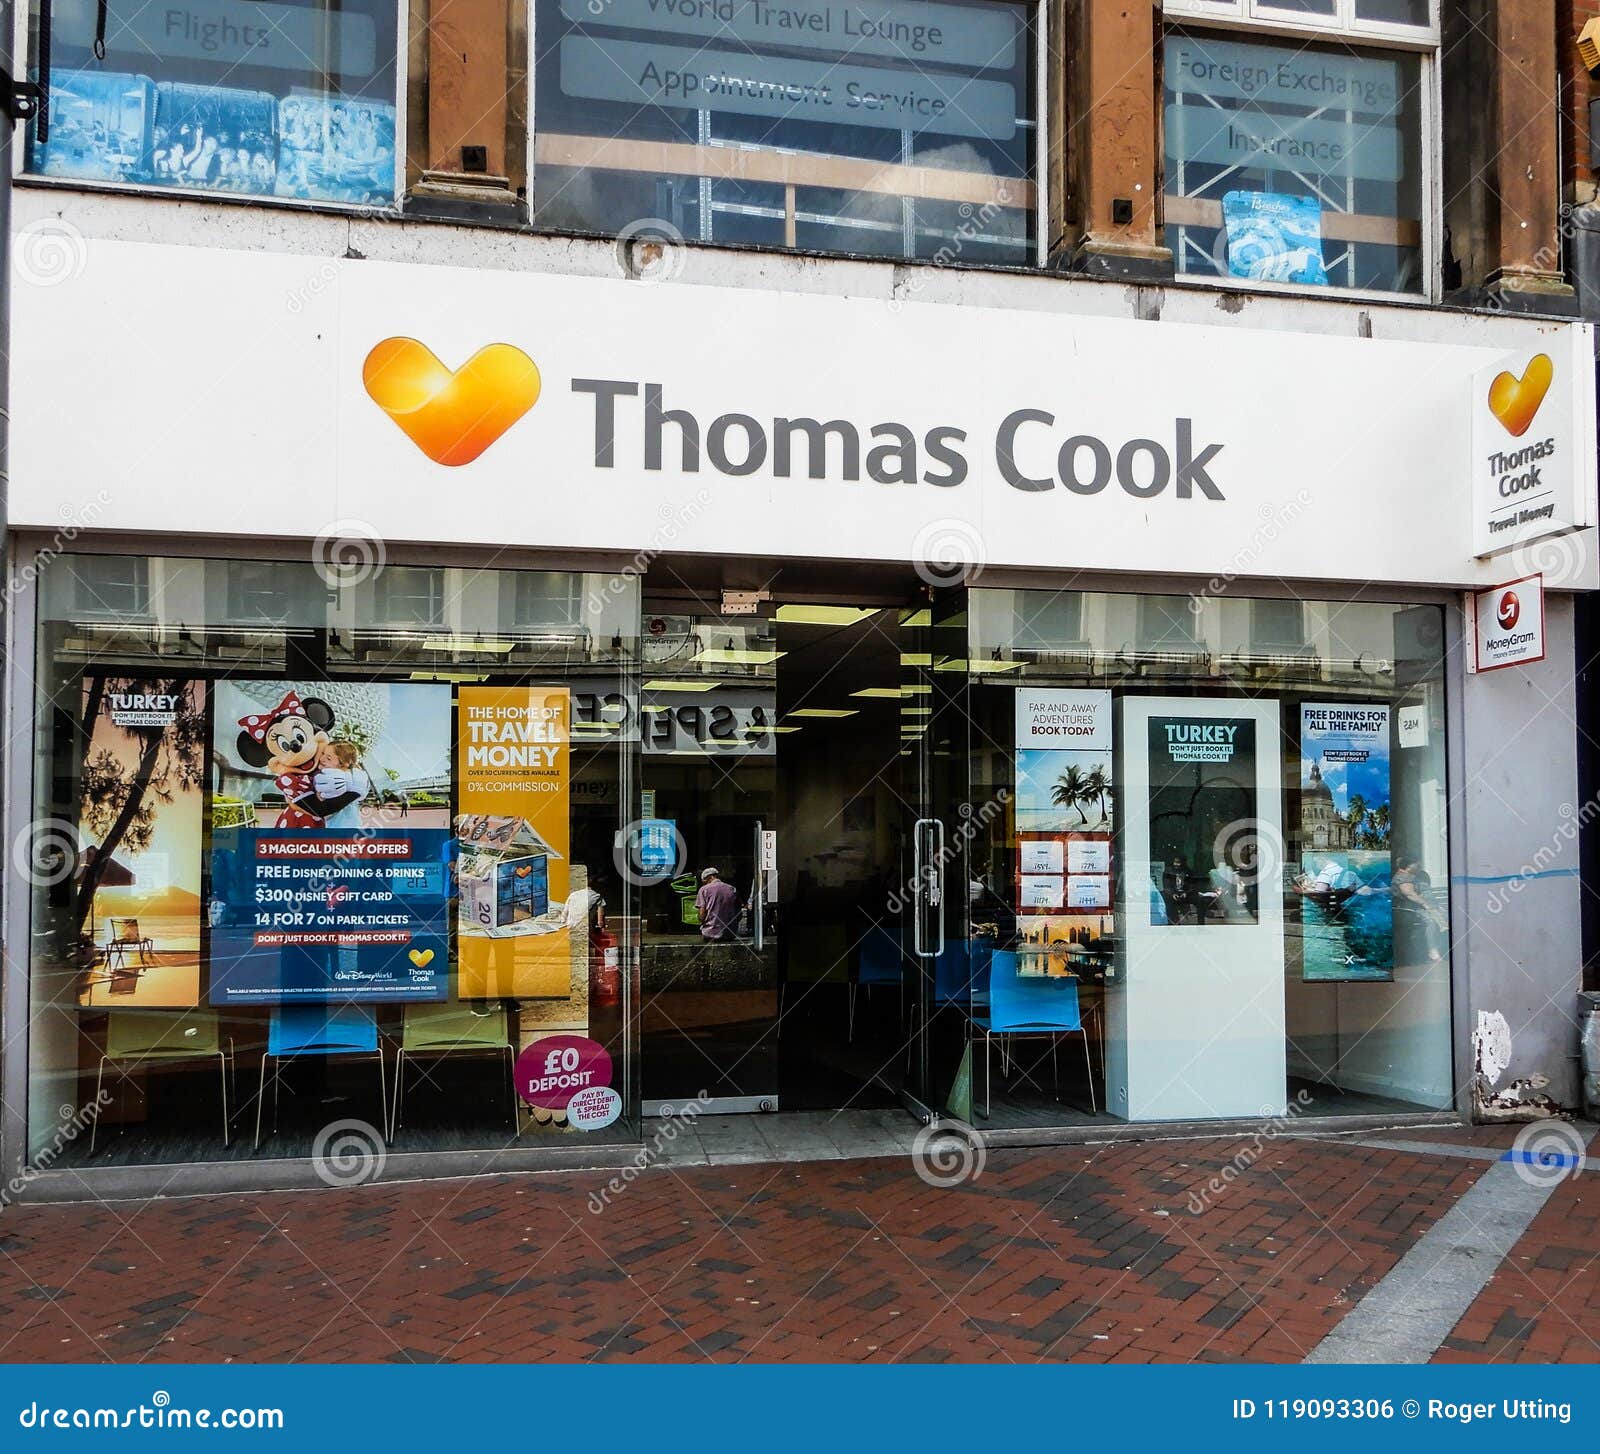 Thomas Cook Frontage Editorial Photo Image Of Emblem 119093306 - 